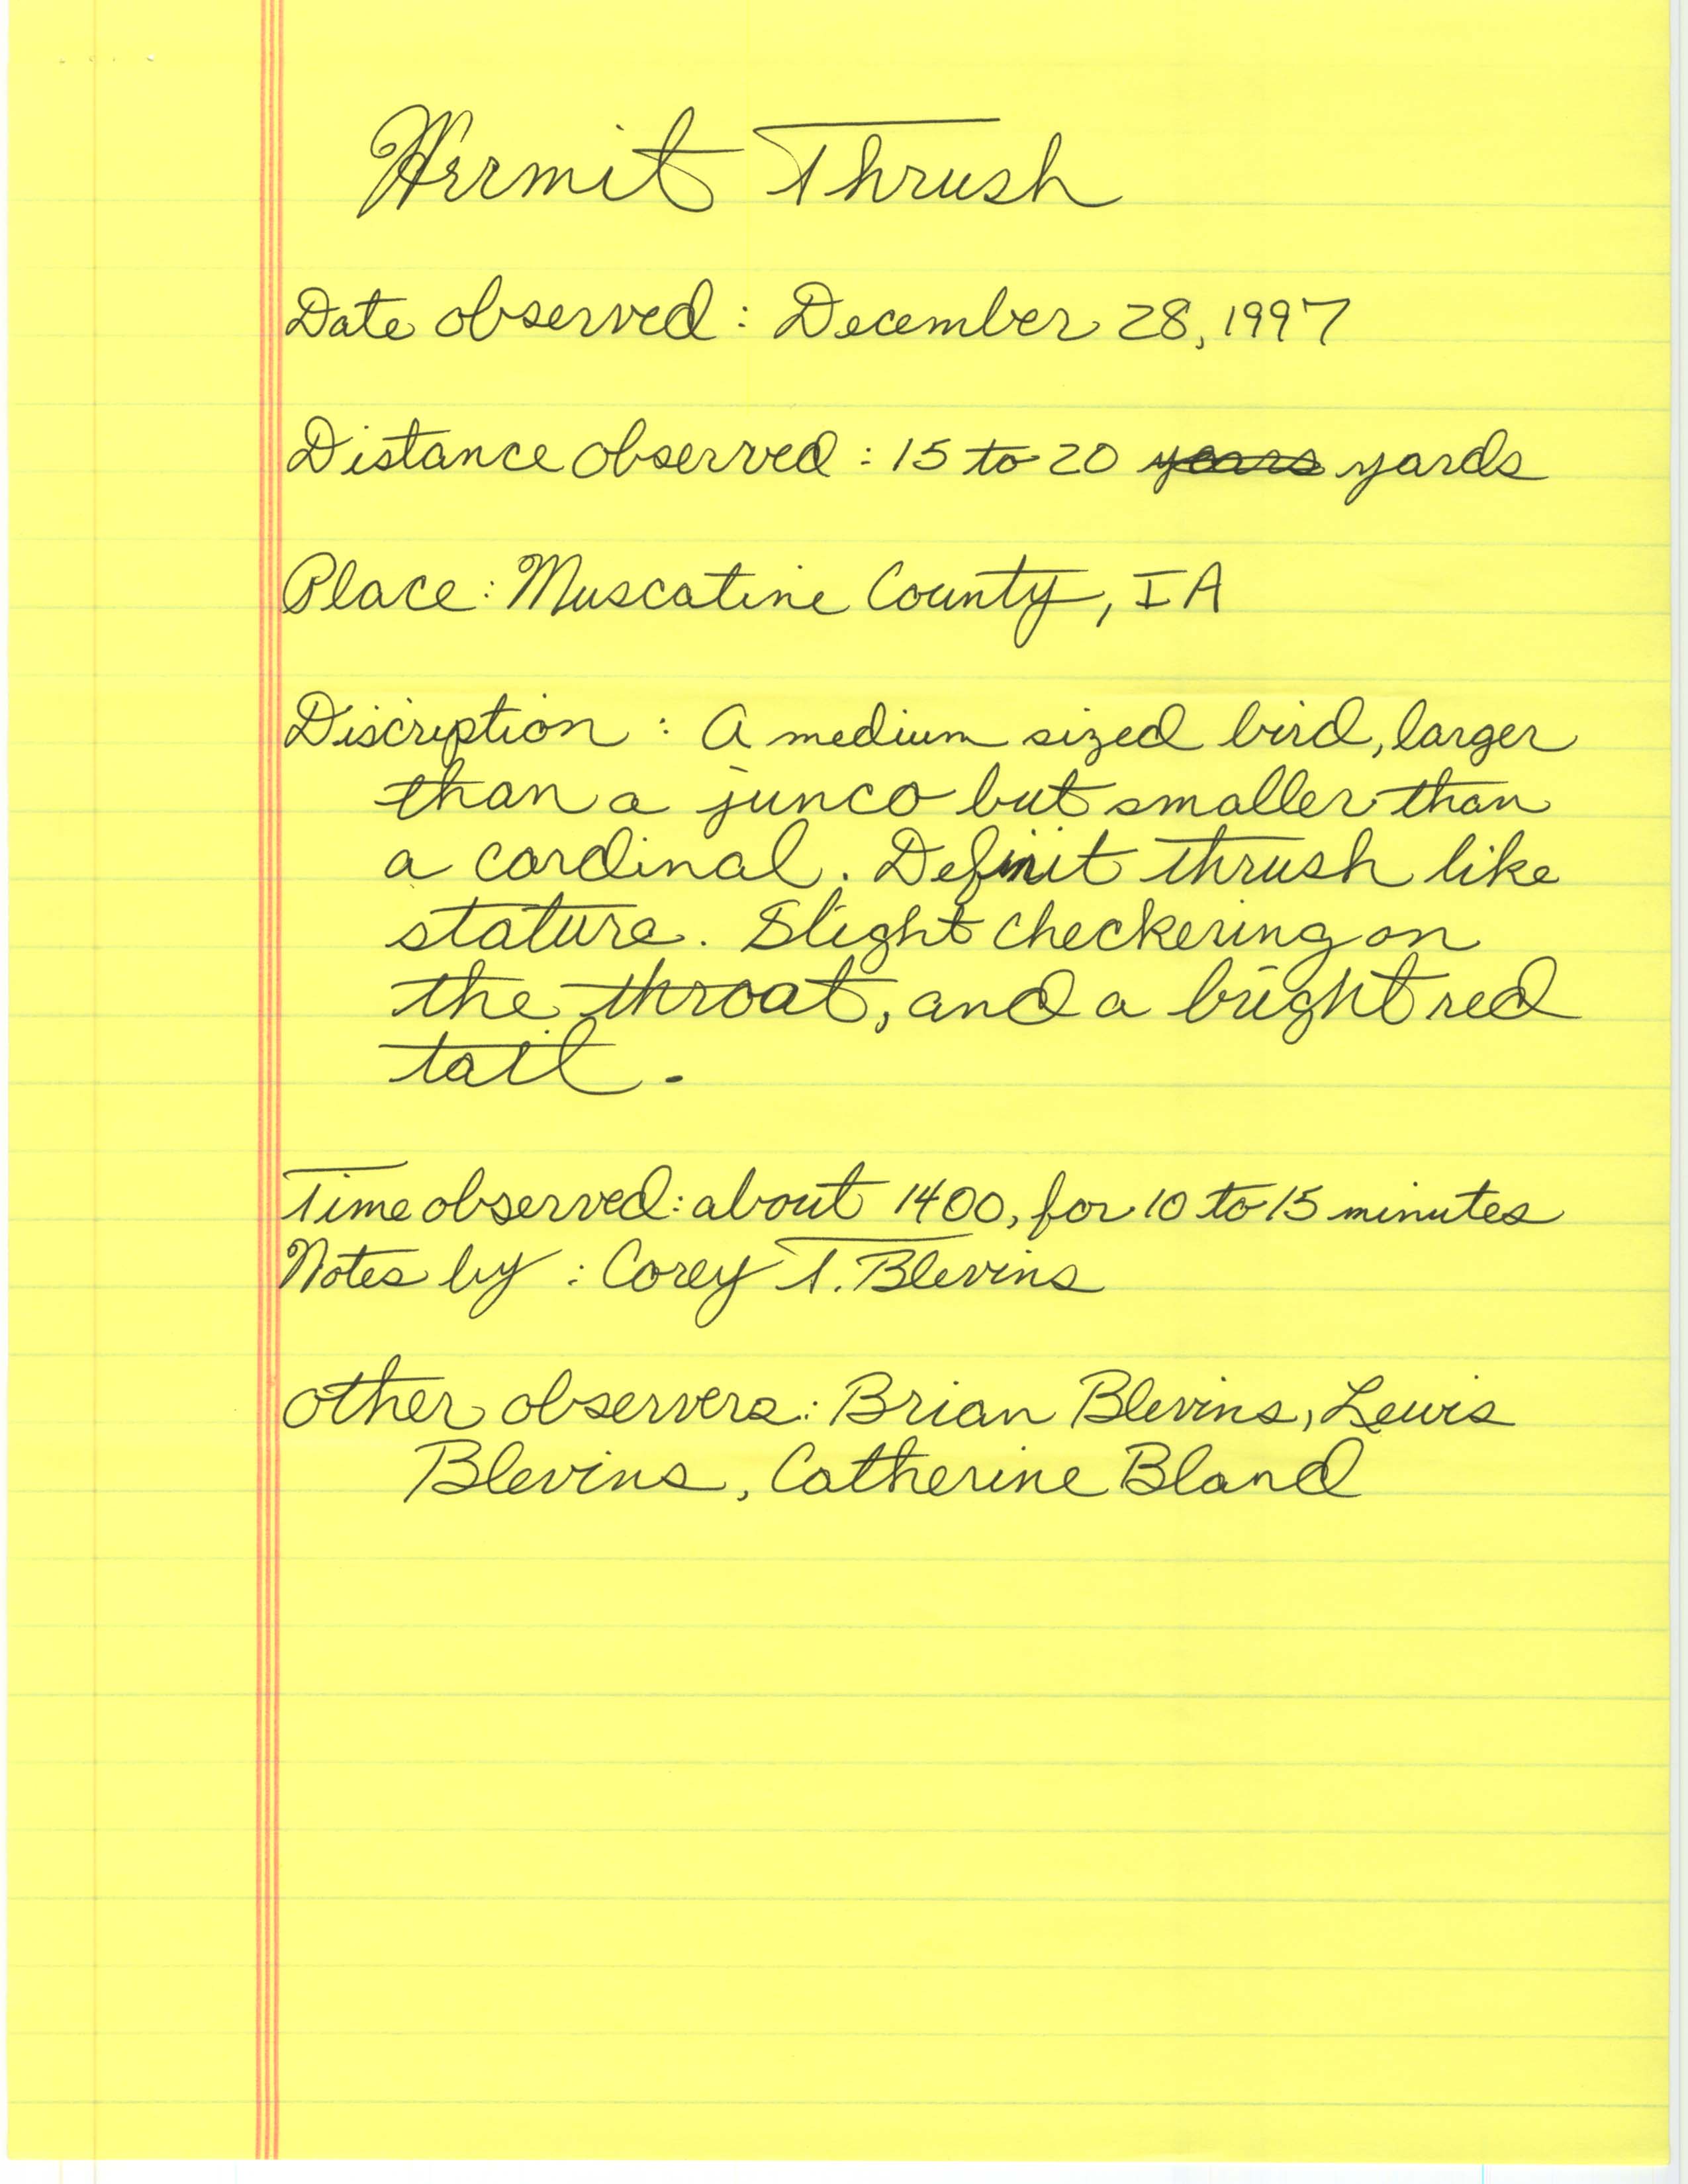 Rare bird documentation form for Hermit Thrush at Muscatine County, 1997